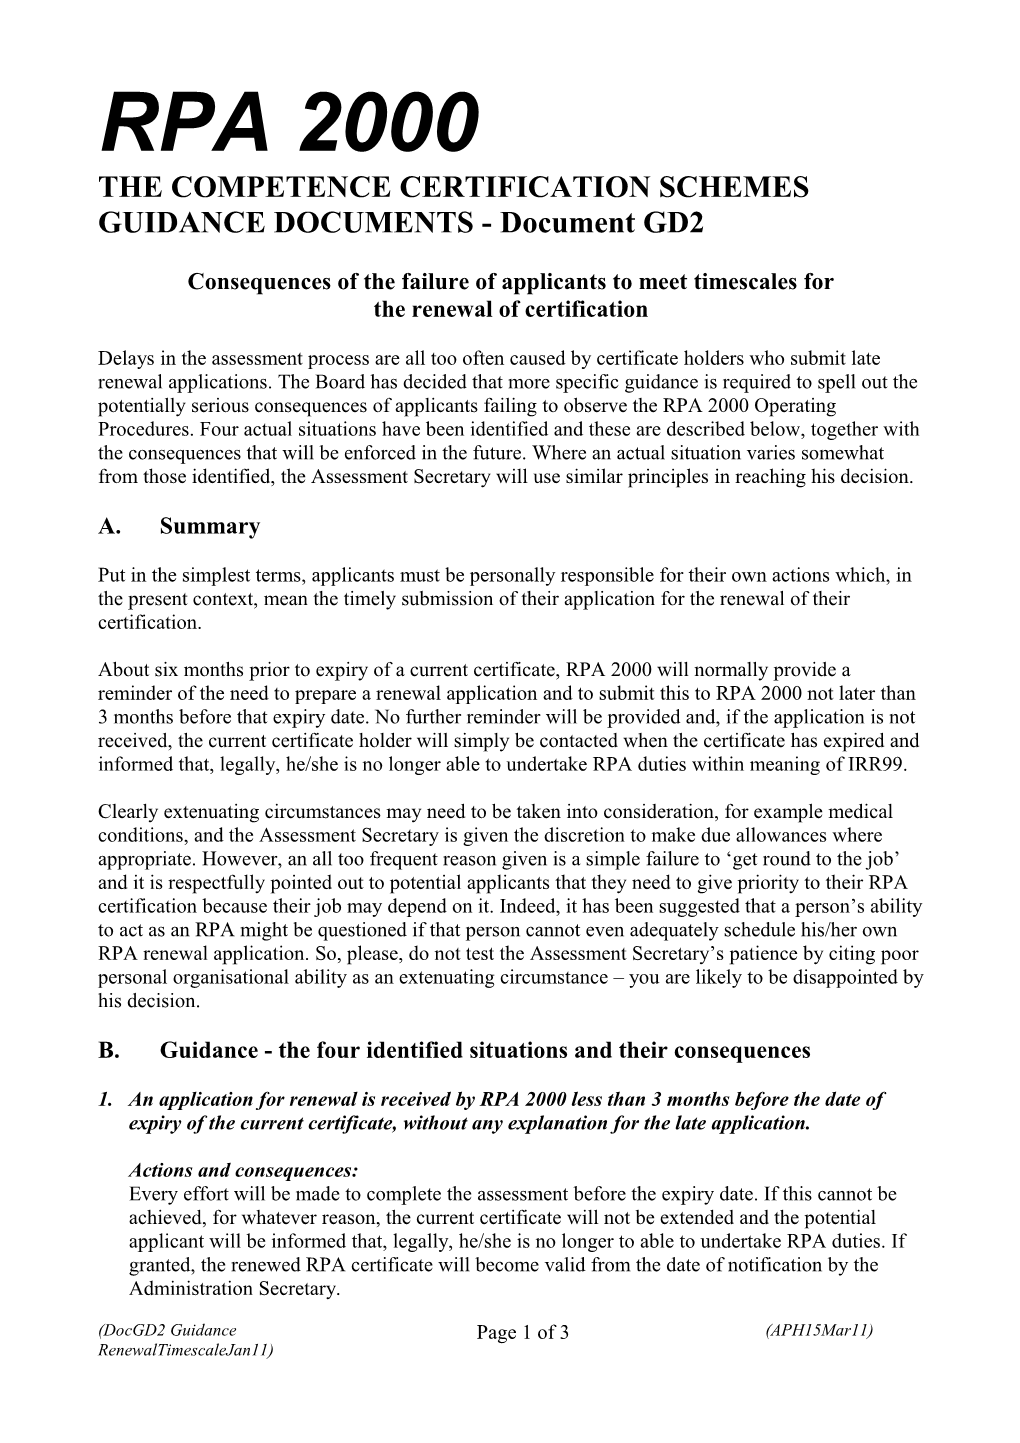 RPA 2000 Guidance Document No